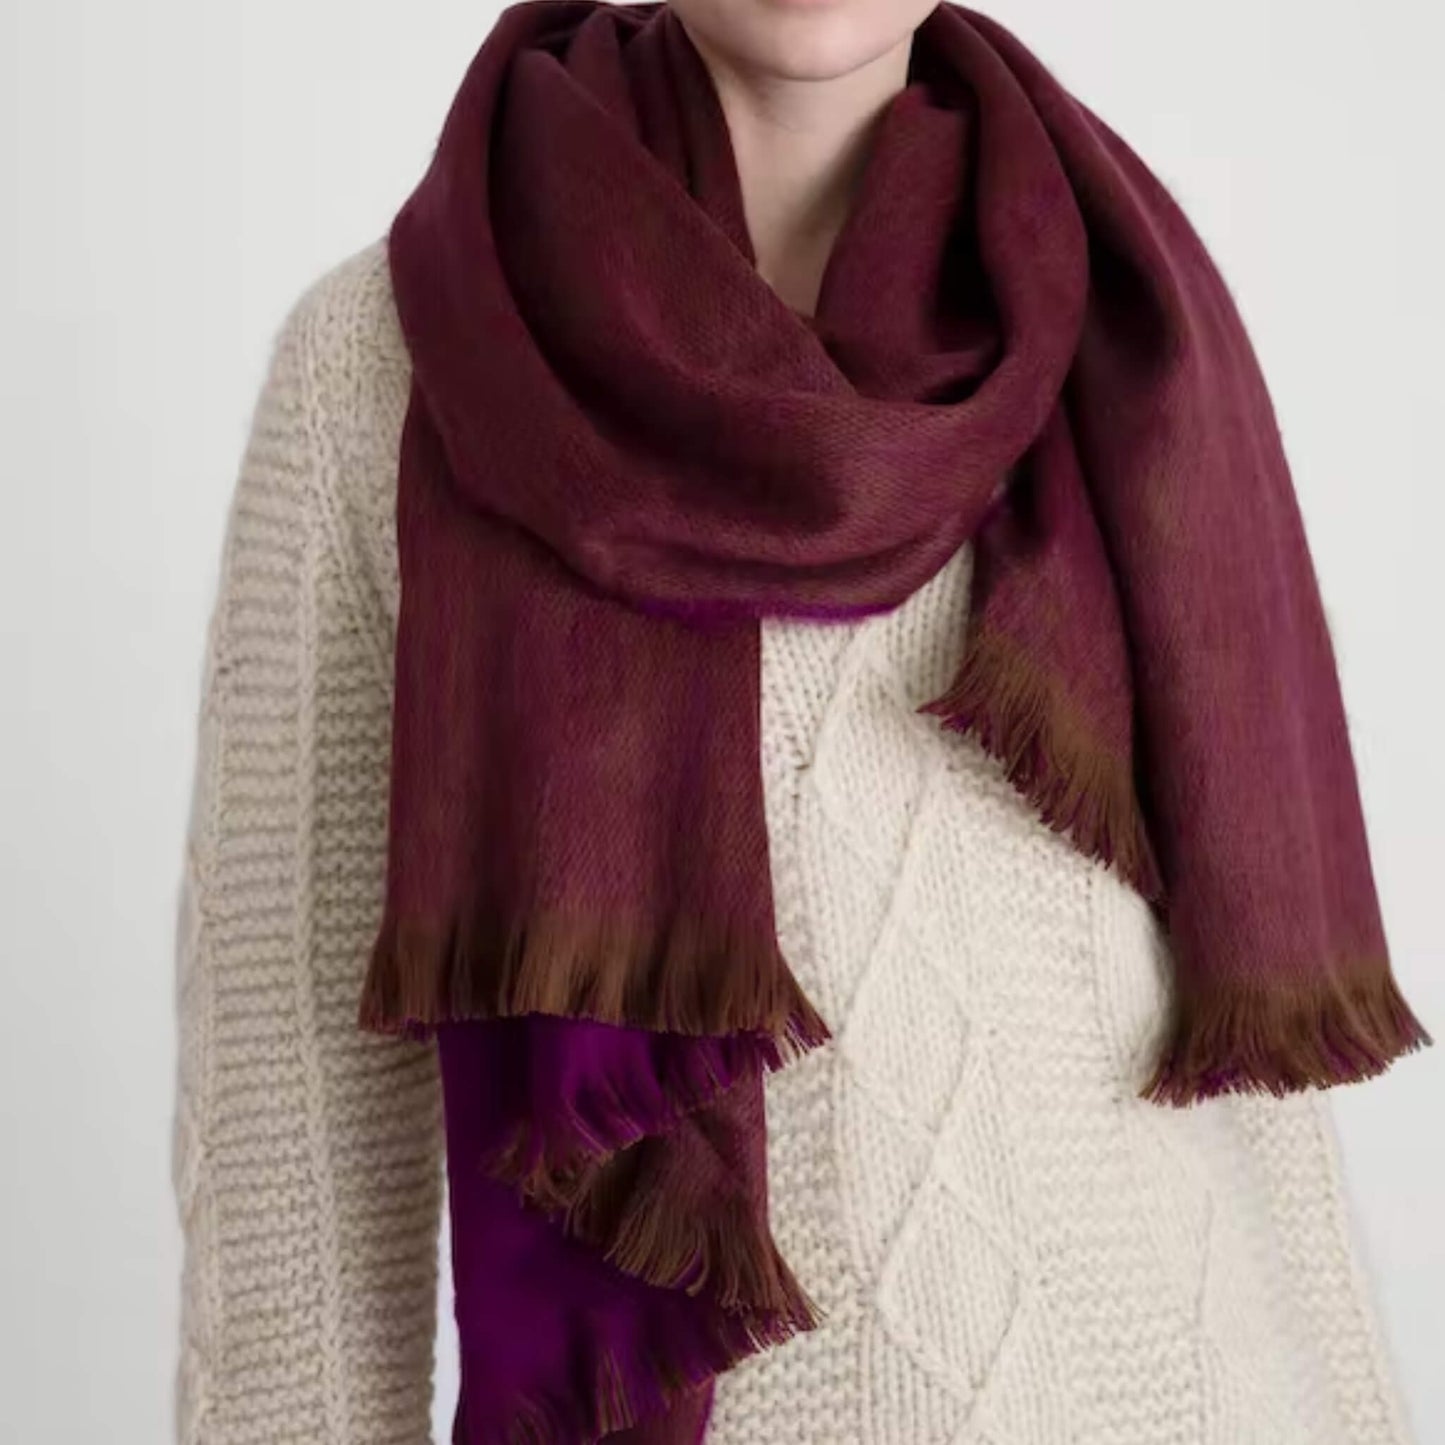 Alpaca Double Scarf Plum red & Chocolate brown - Unik by Nature